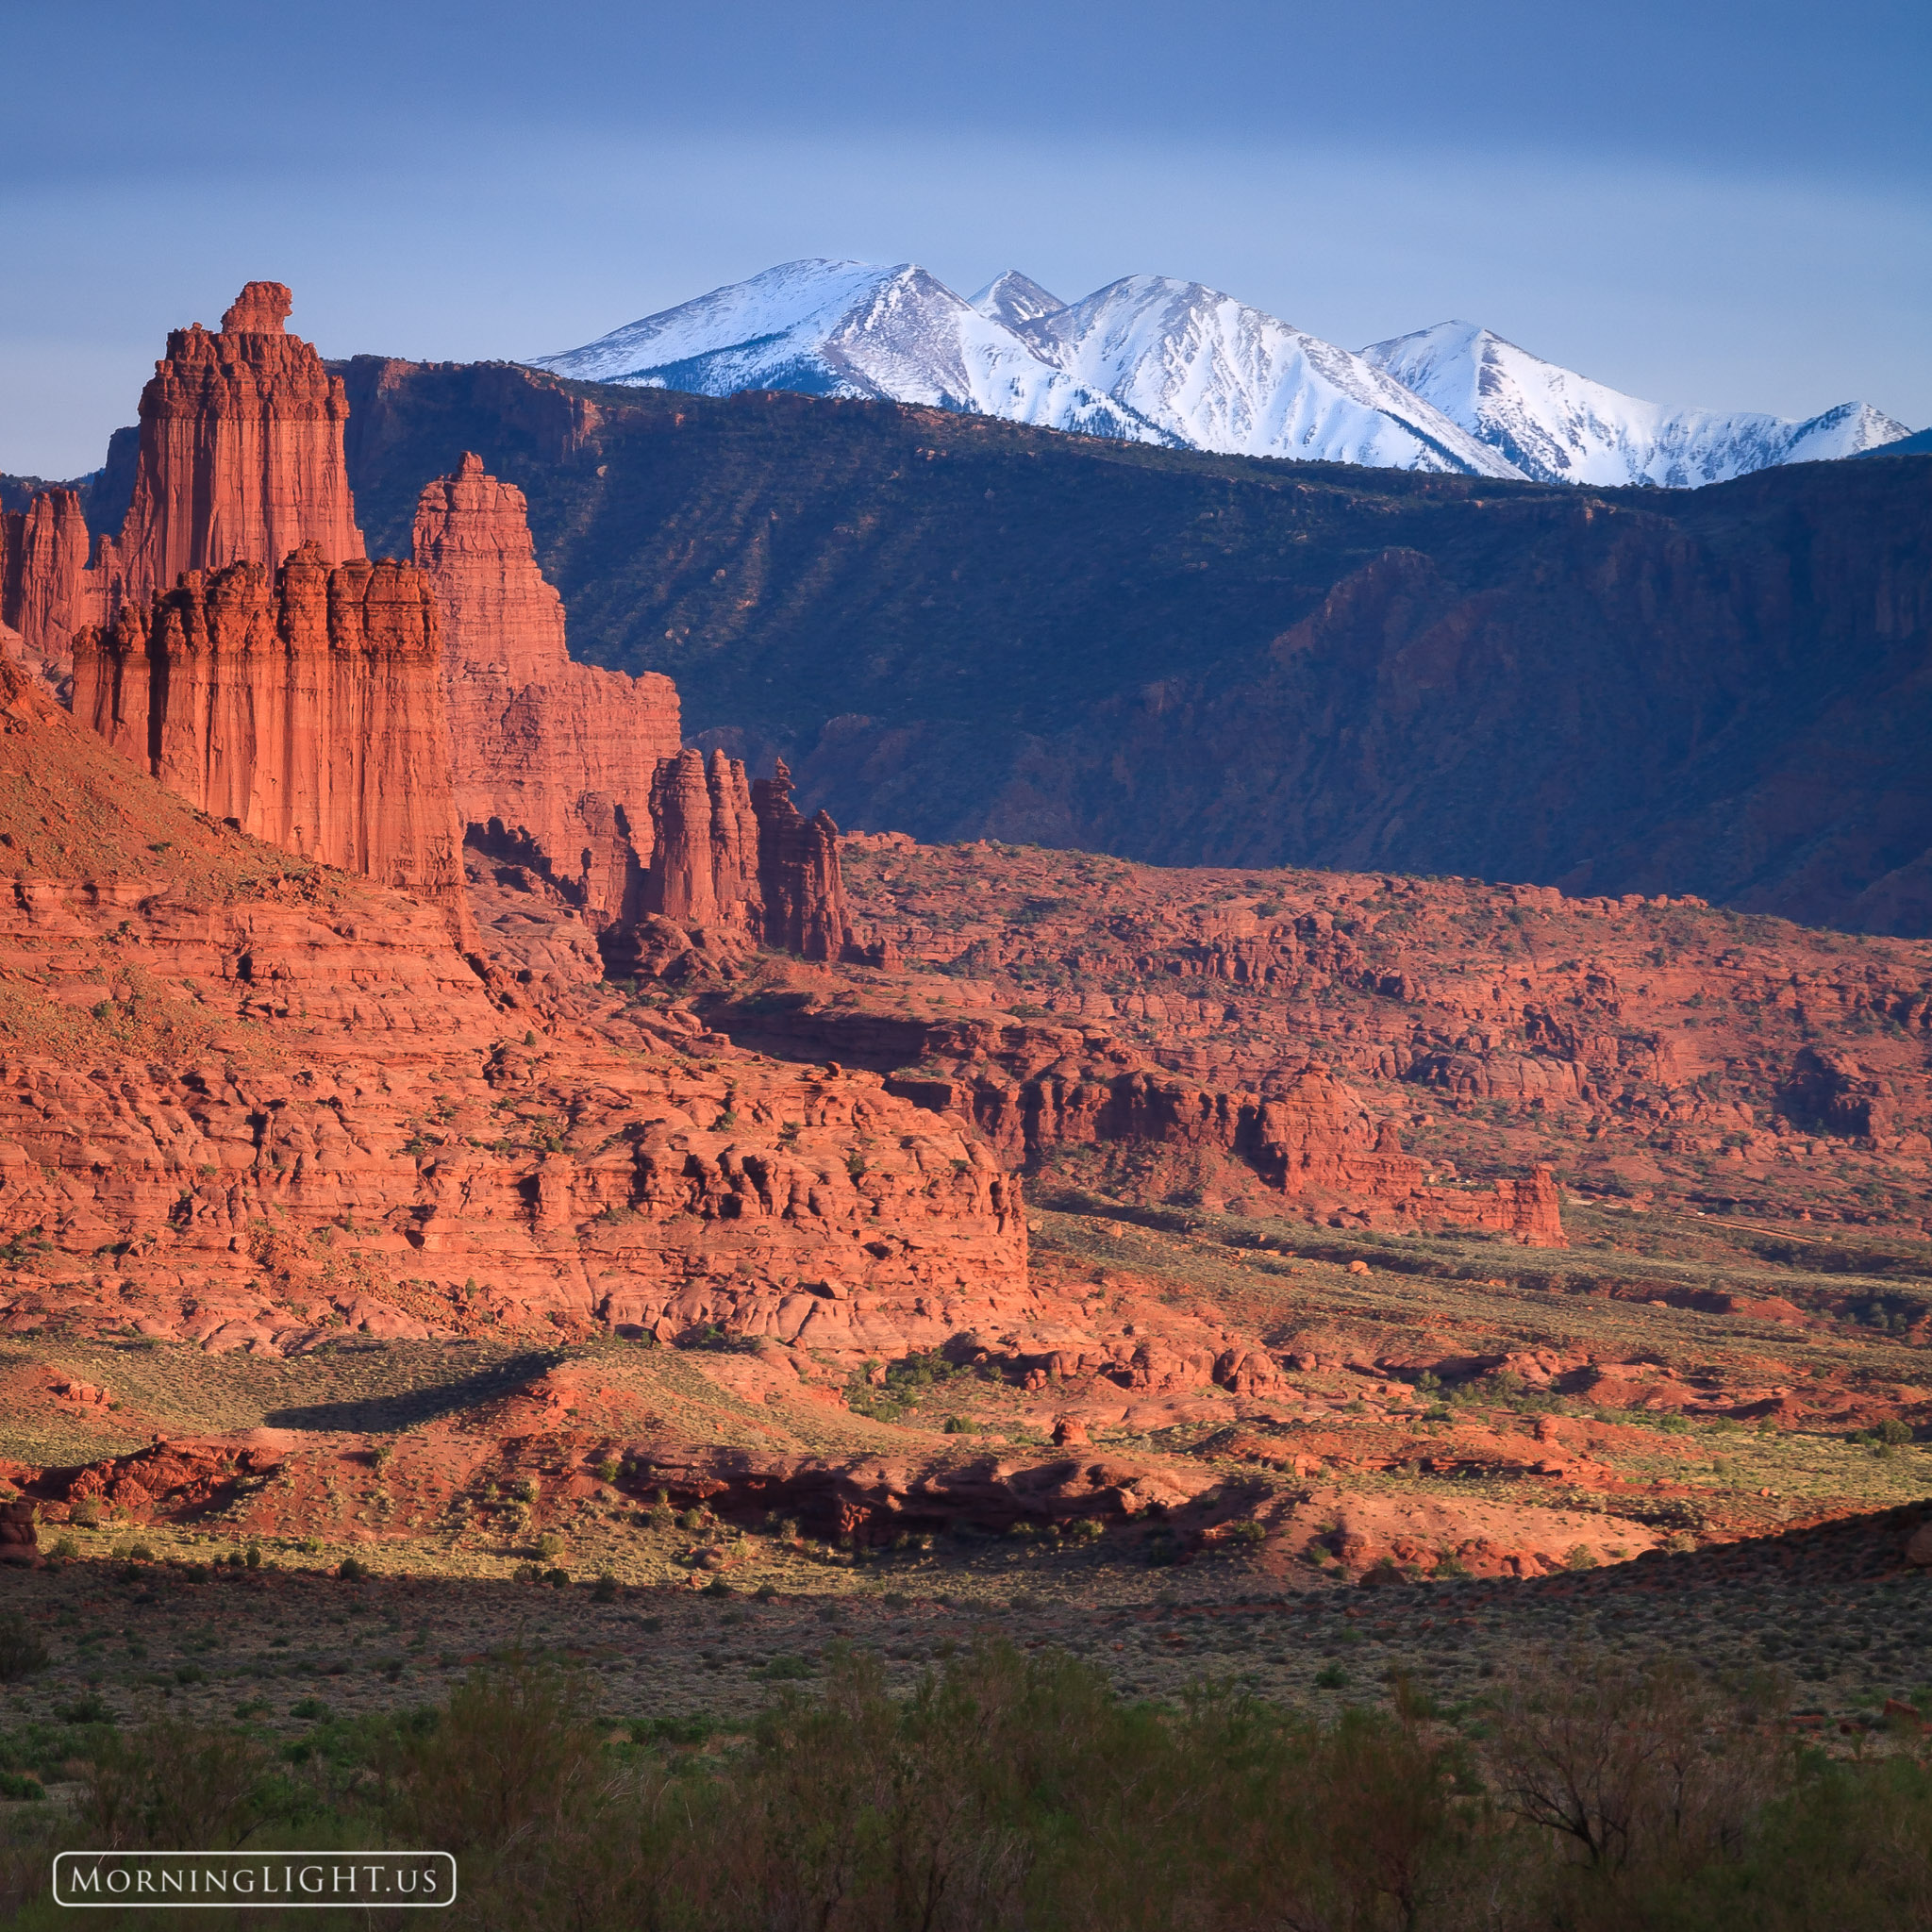 A view of Fisher Towers and the La Sal Mountains from north of Moab, Utah at sunset. This can be printed in sizes up to 24"x24...